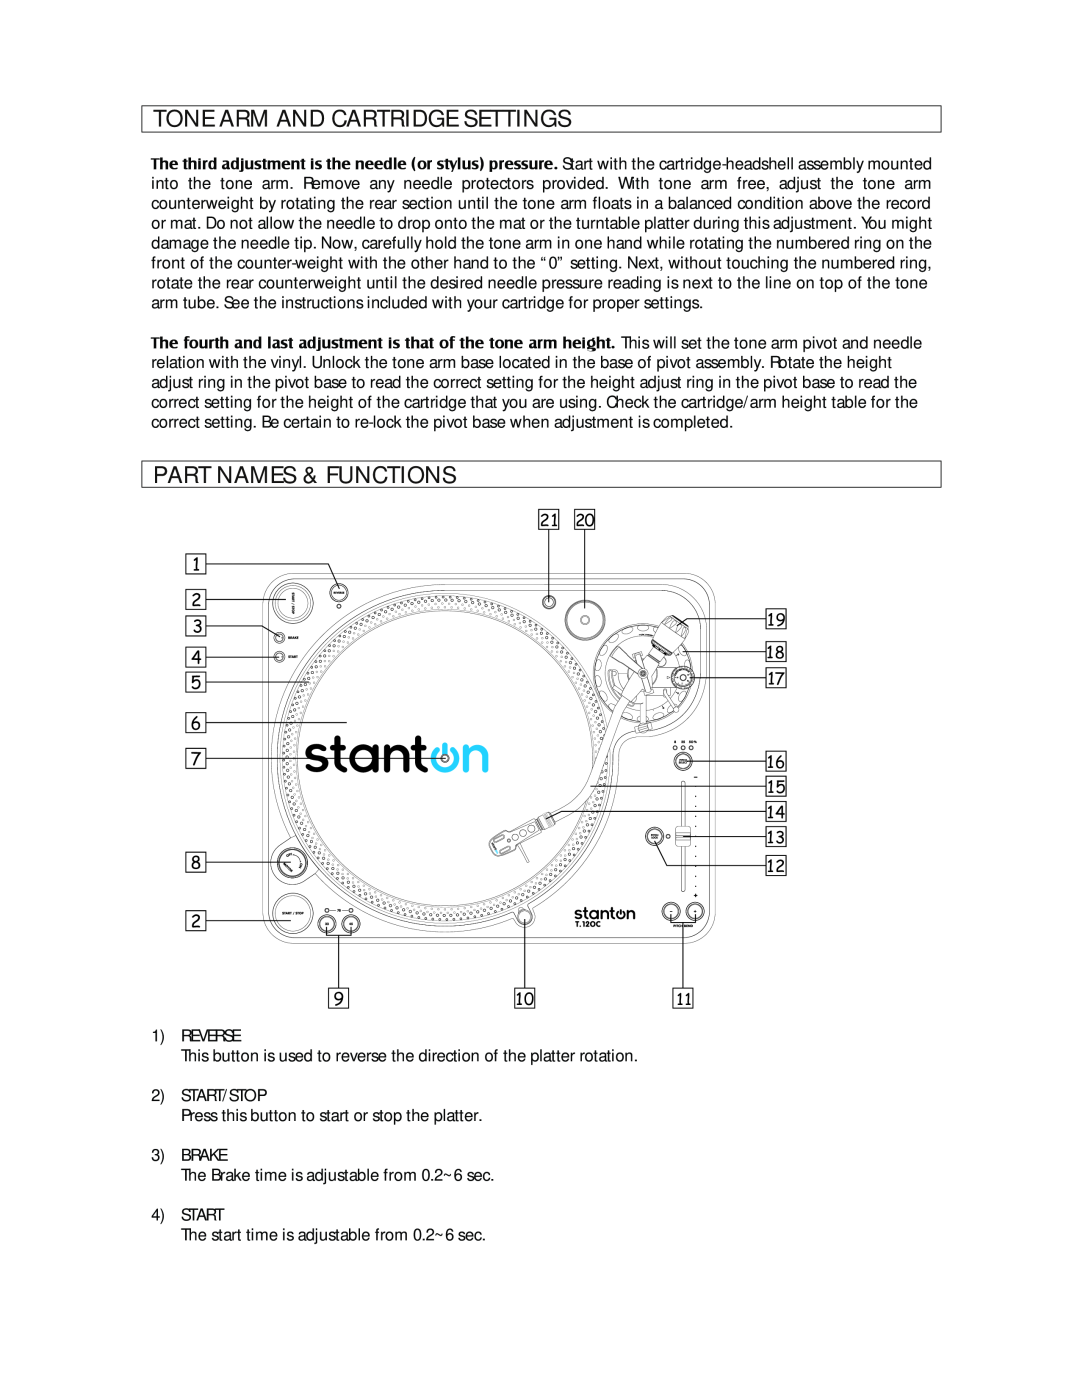 Stanton T.12OC manual Part Names & Functions, Tone Arm And Cartridge Settings, 2120, 1 2, 19 18 17 16 15 14 